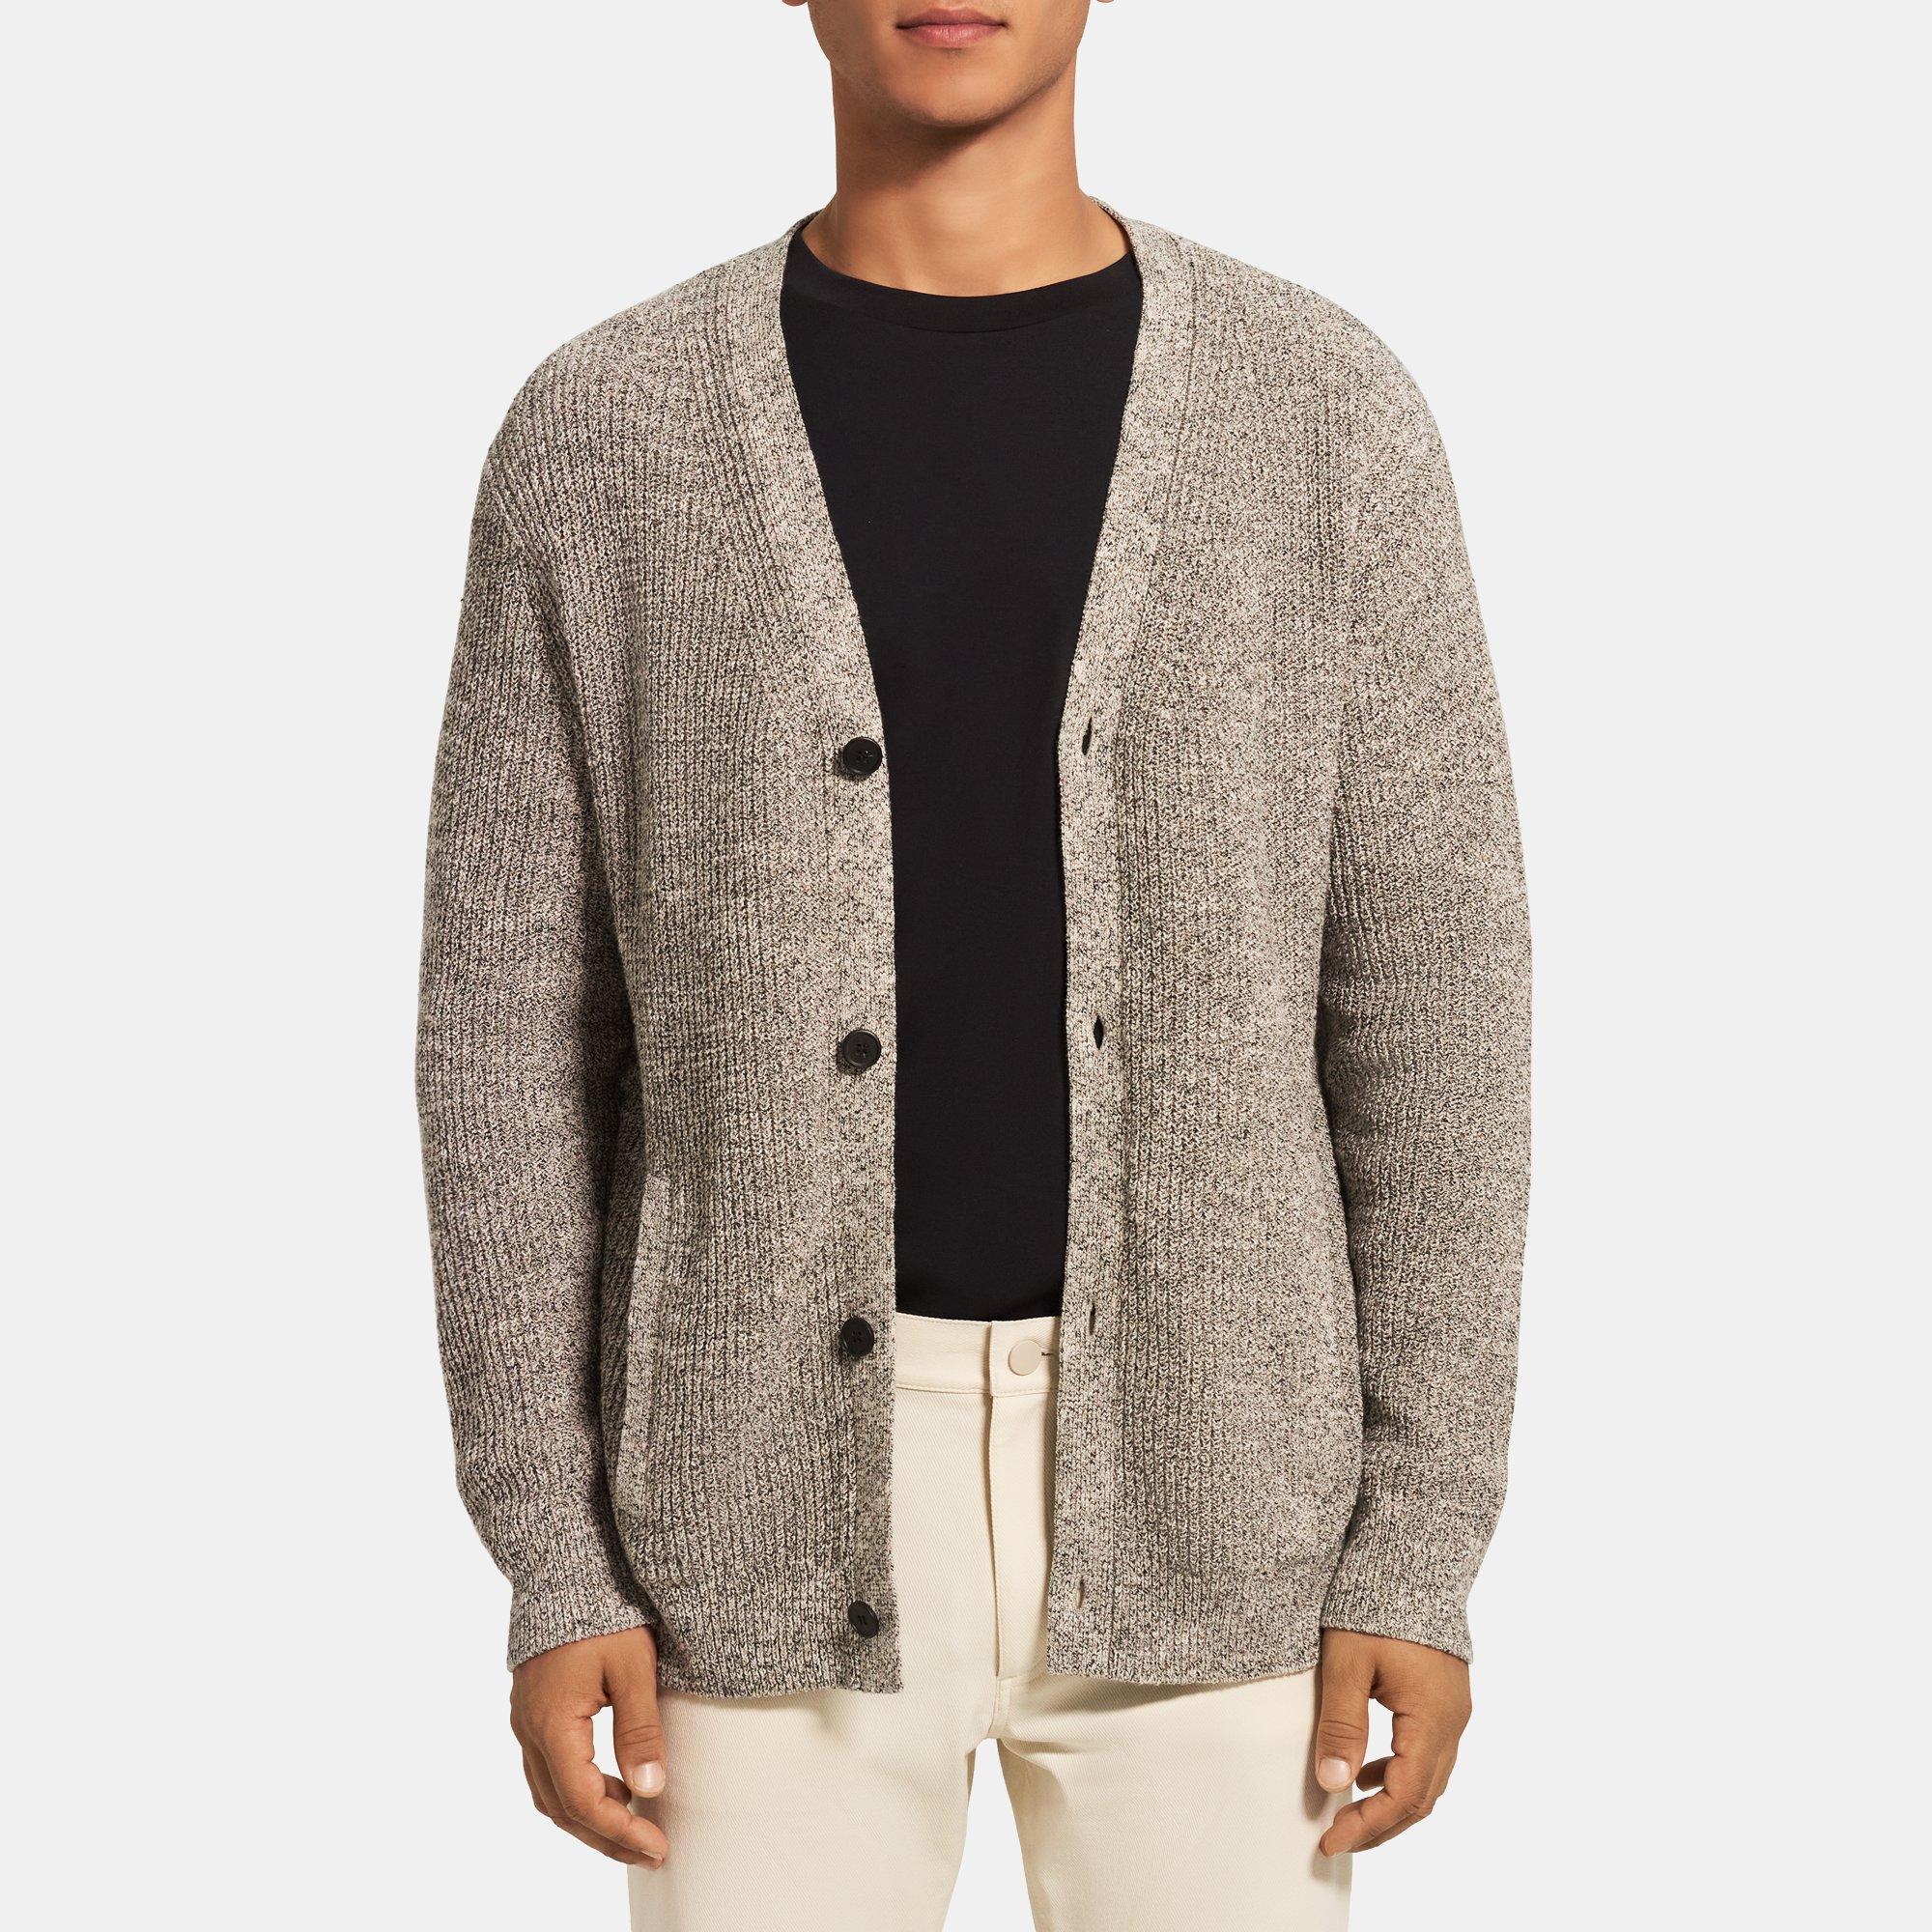 Theory V-Neck Cardigan in Cotton-Blend Tweed